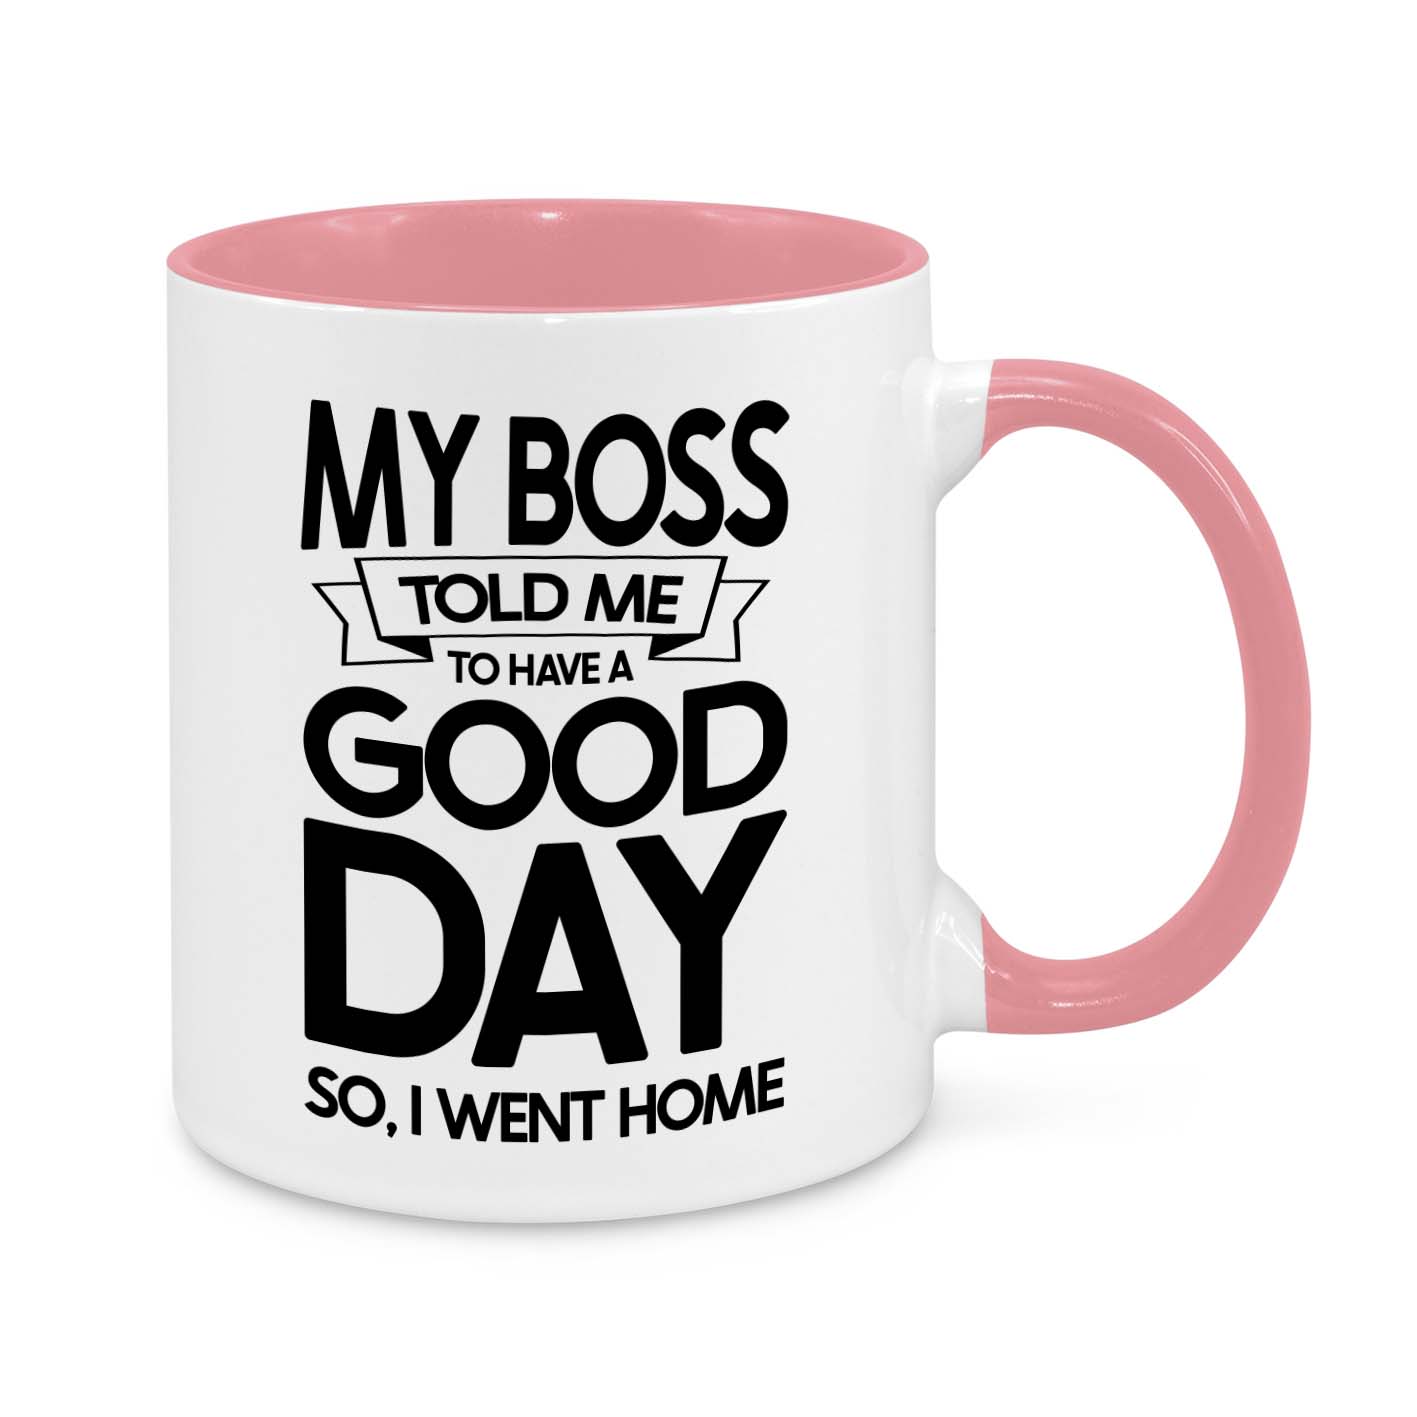 My Boss Told Me to Have a Good Day Novelty Mug